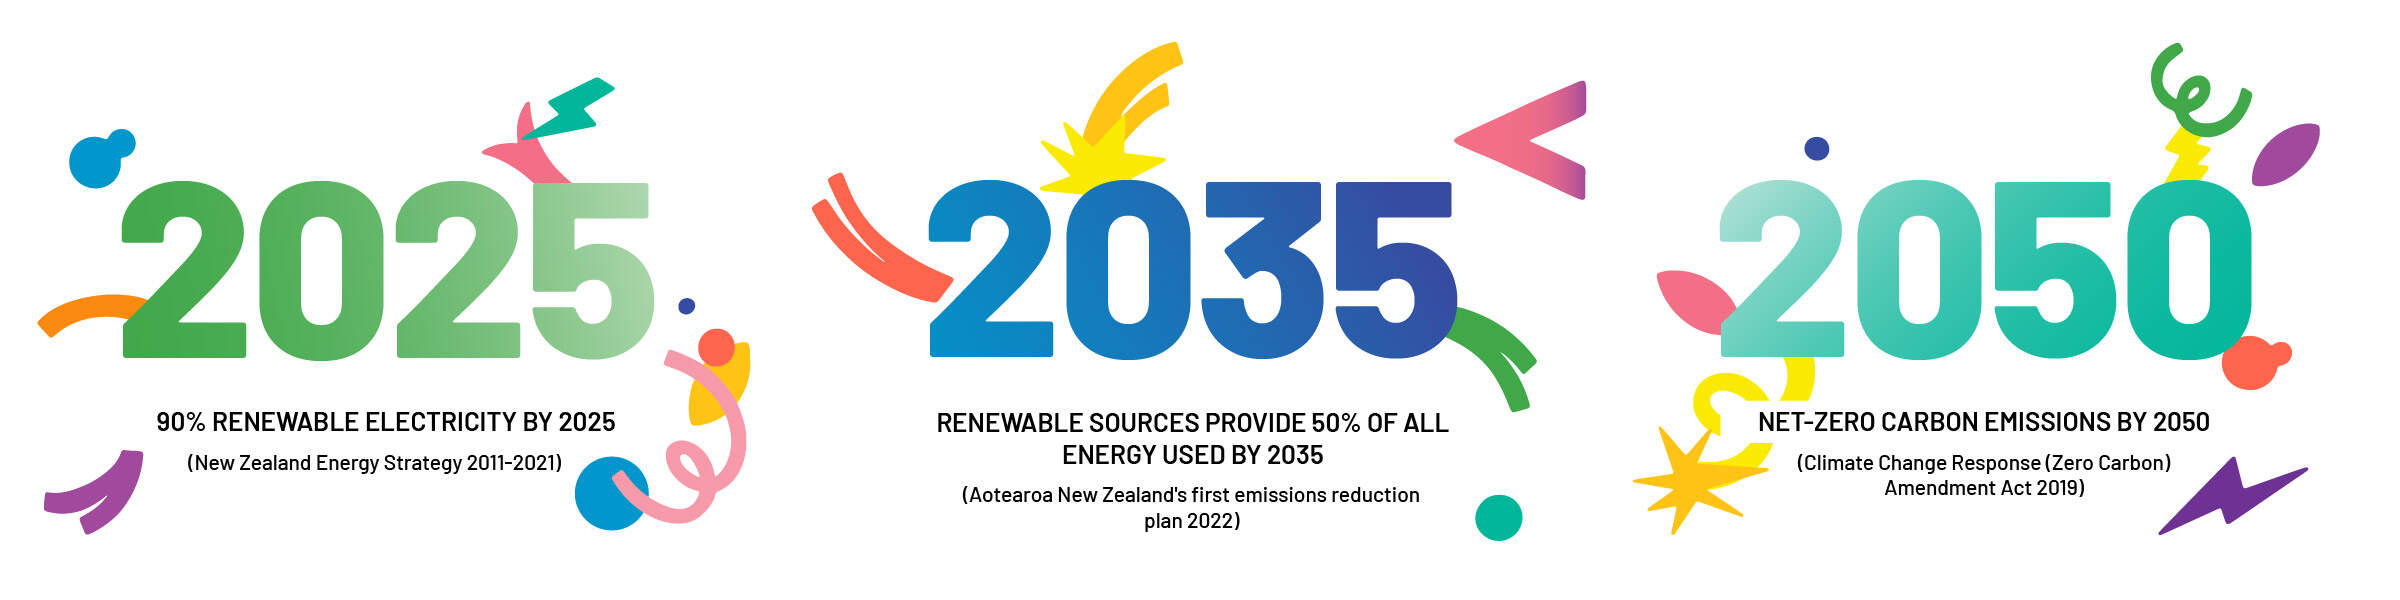 Illustration showing the targets, 90% renewable electricity by 2025, renewable sources provide 50% of all energy used by 2035, net-zero carbon emissions by 2050. 